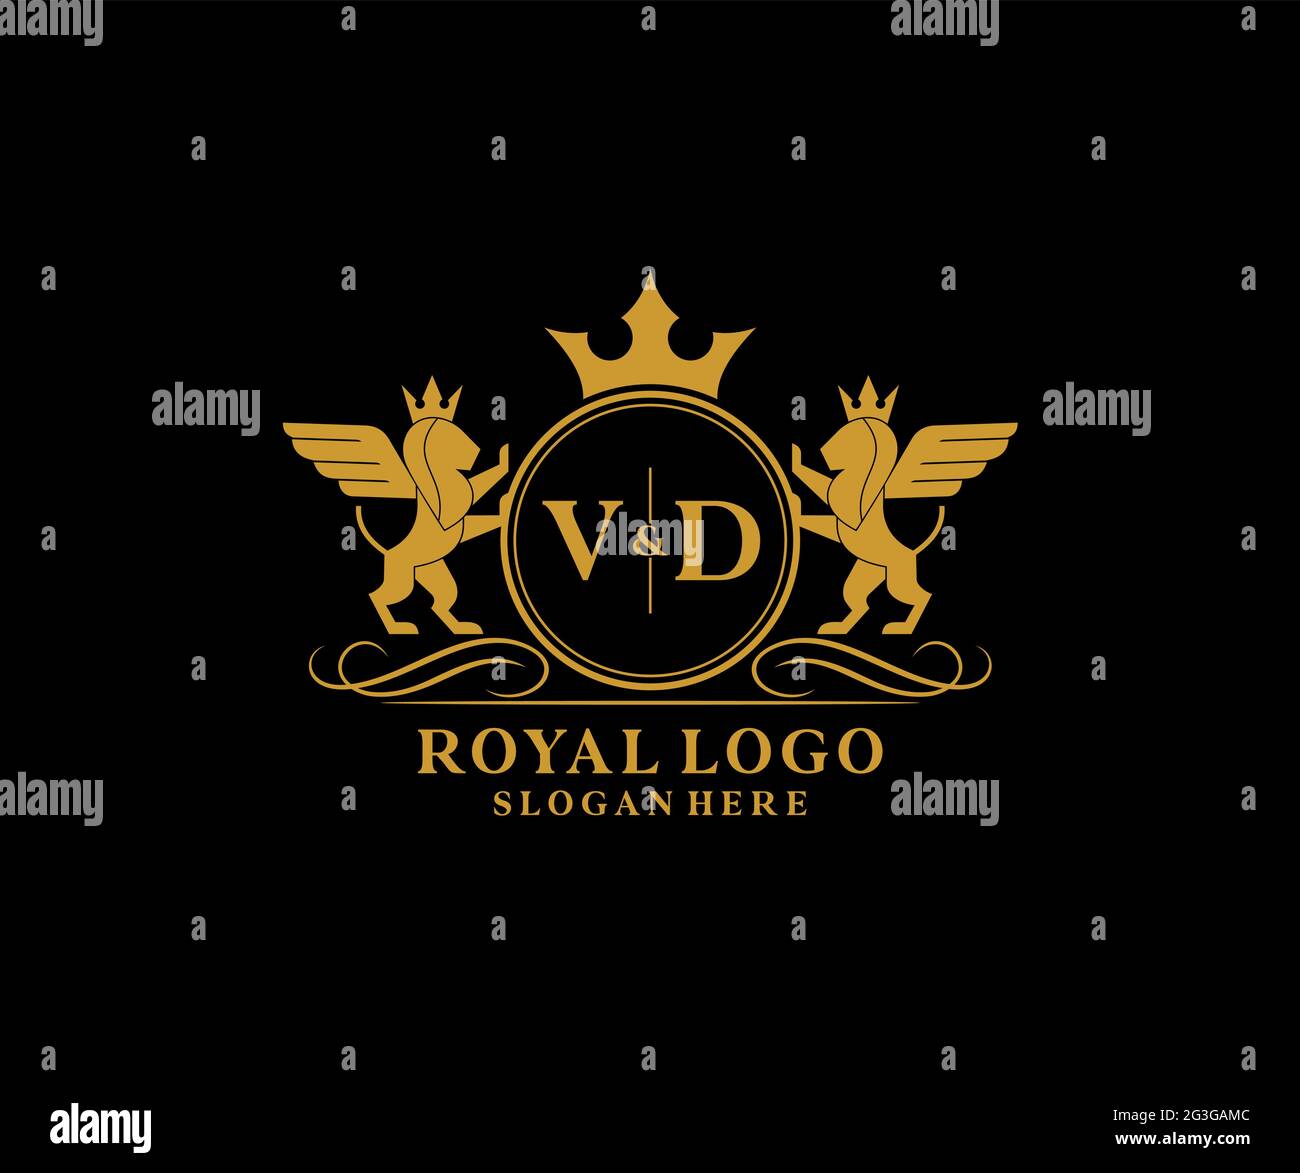 VD Letter Lion Royal Luxury Heraldic,Crest Logo template in vector art for Restaurant, Royalty, Boutique, Cafe, Hotel, Heraldic, Jewelry, Fashion and Stock Vector